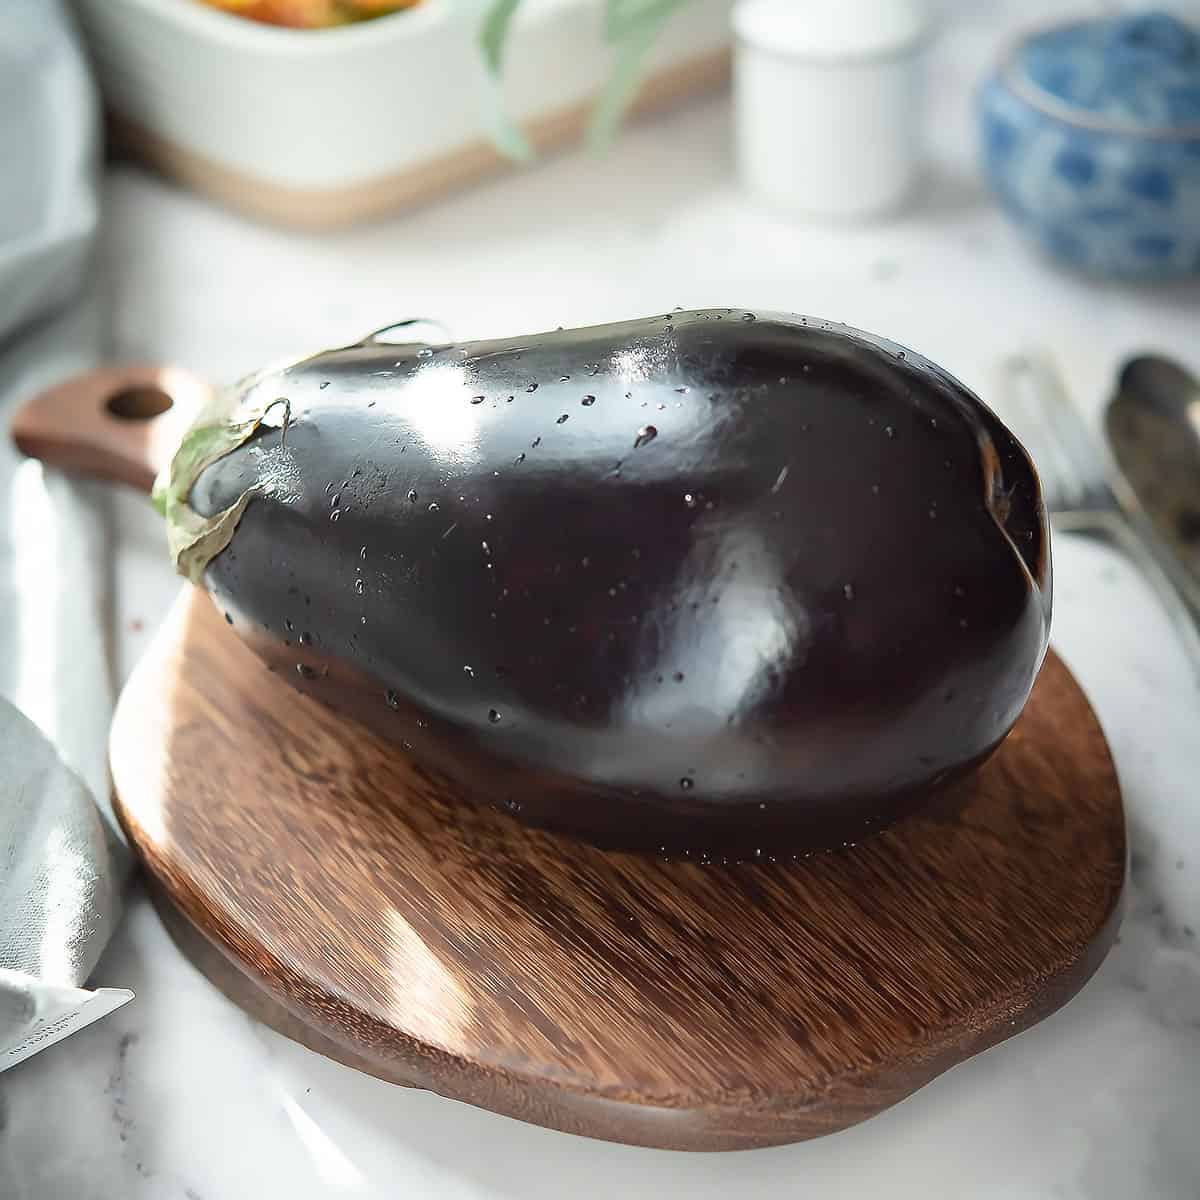 eggplant kept ready for cutting